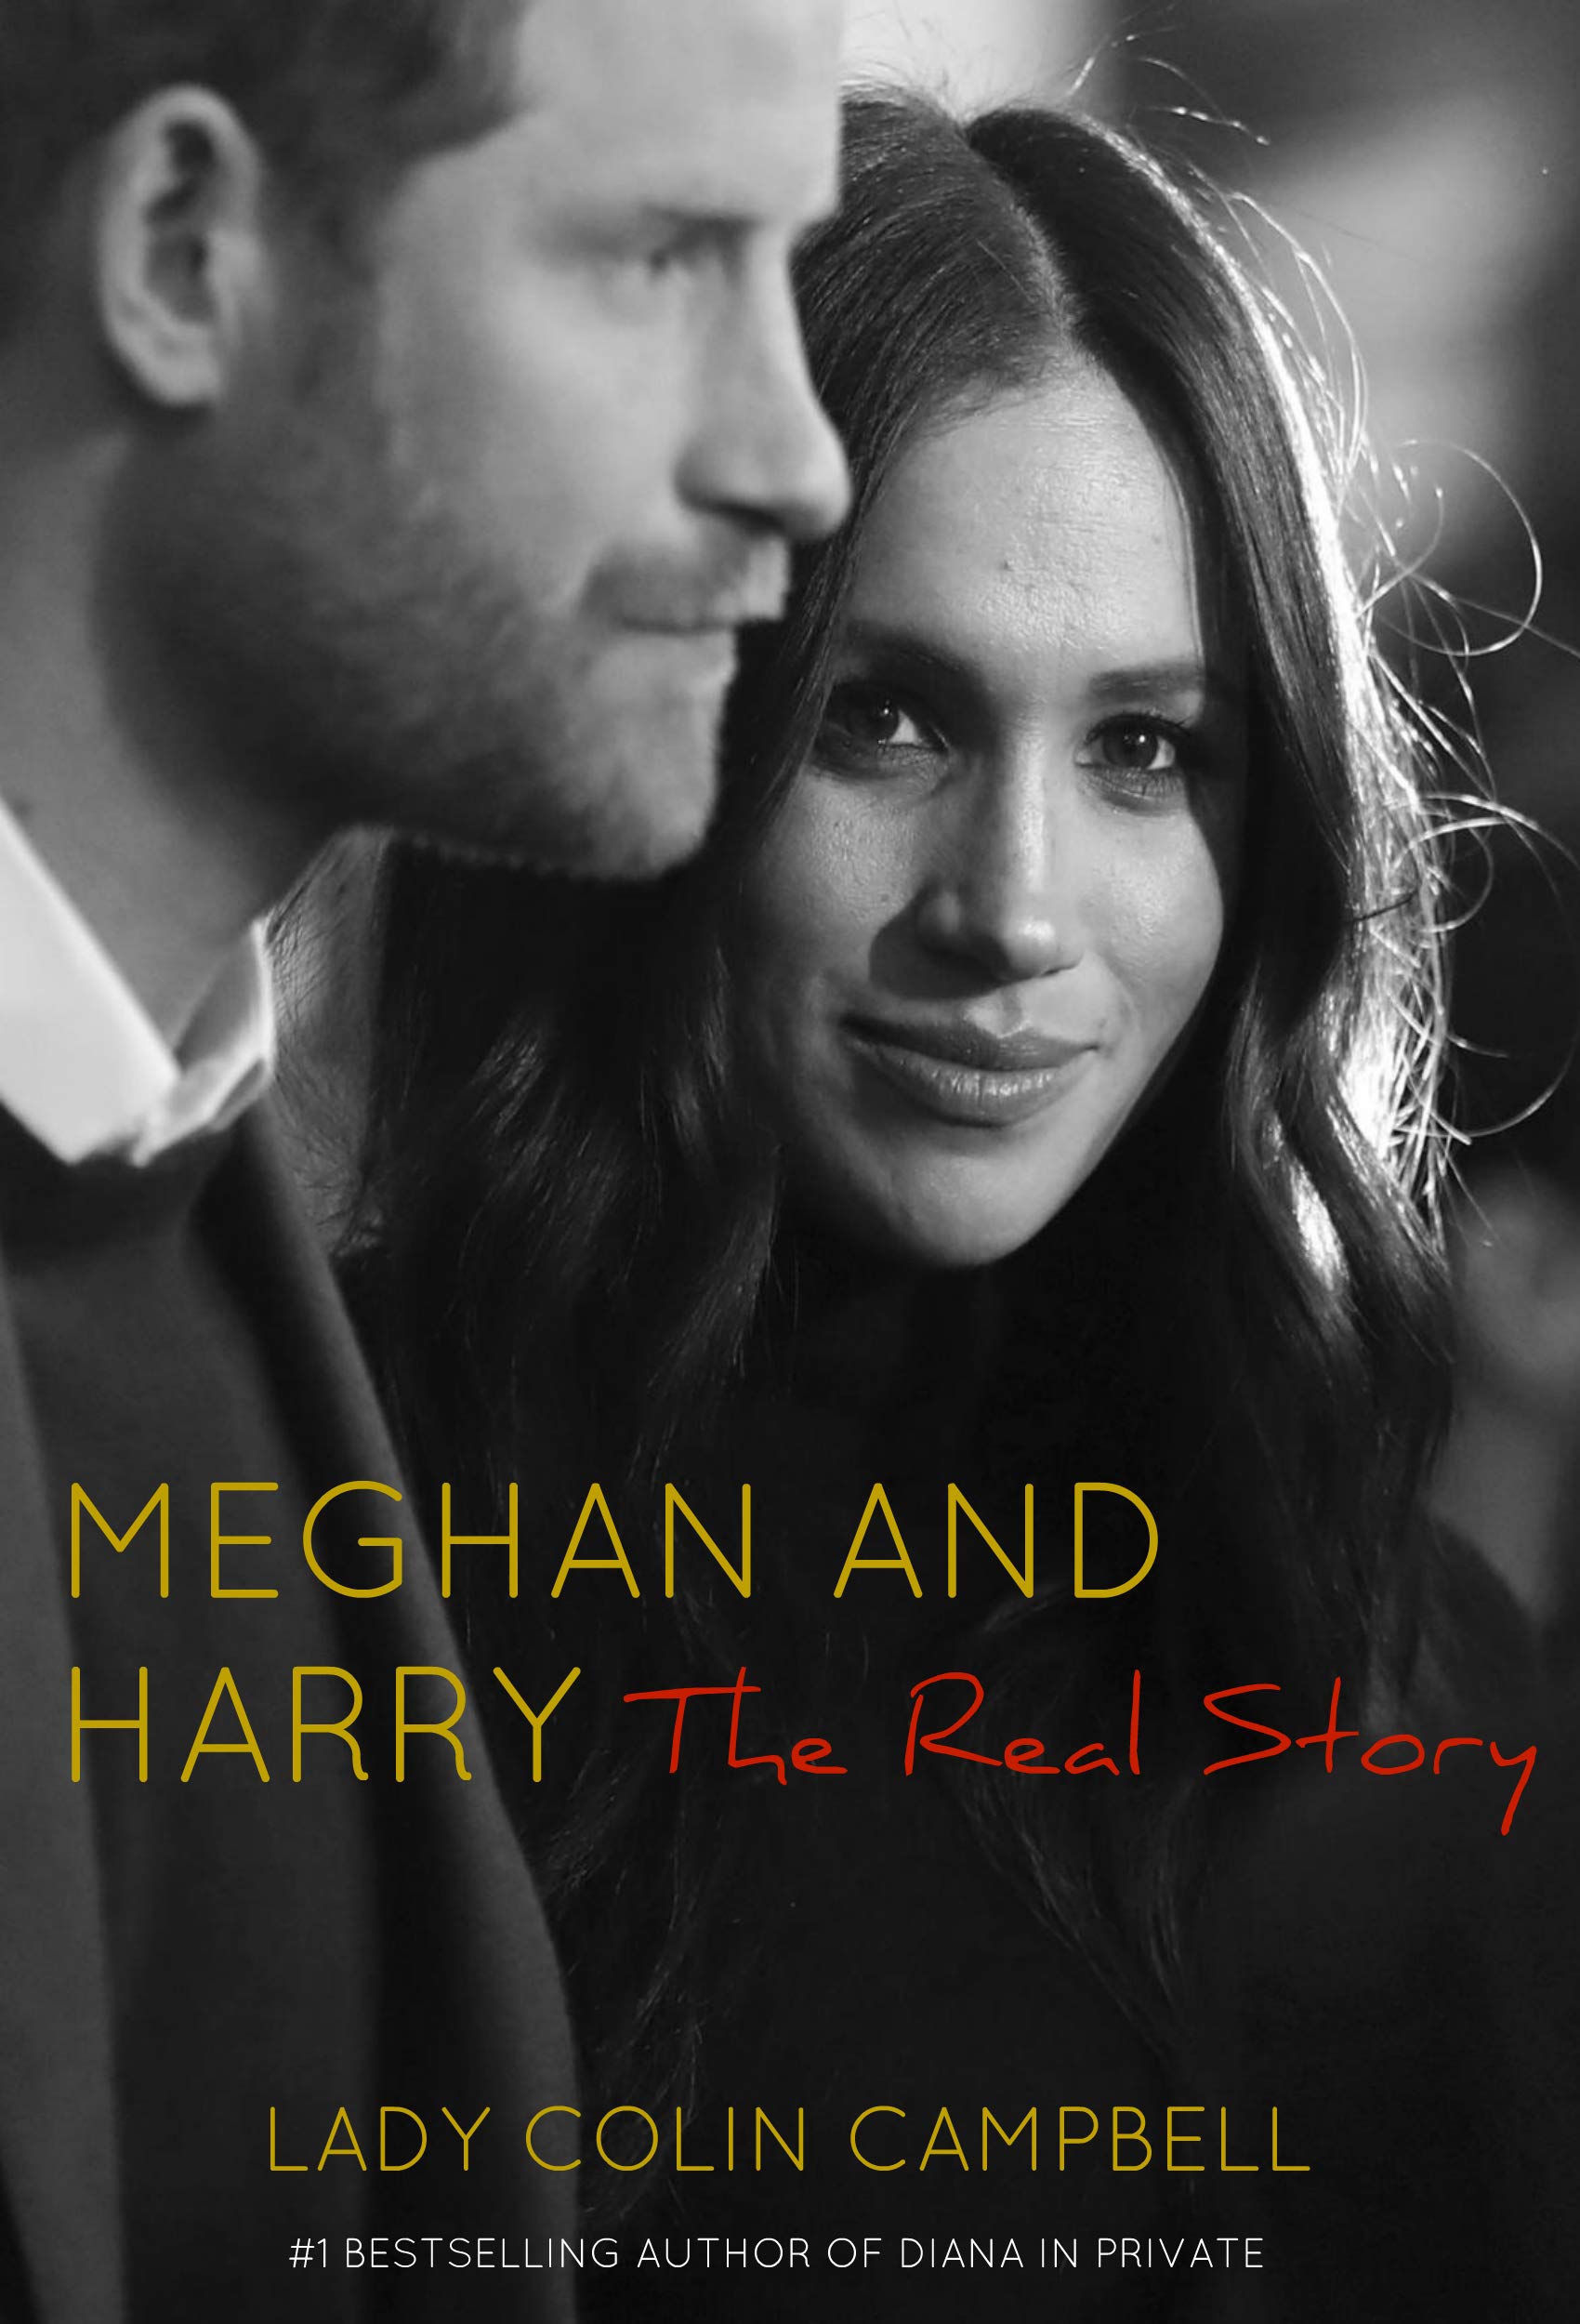 [EPUB] Meghan and Harry: The Real Story by Lady Colin Campbell